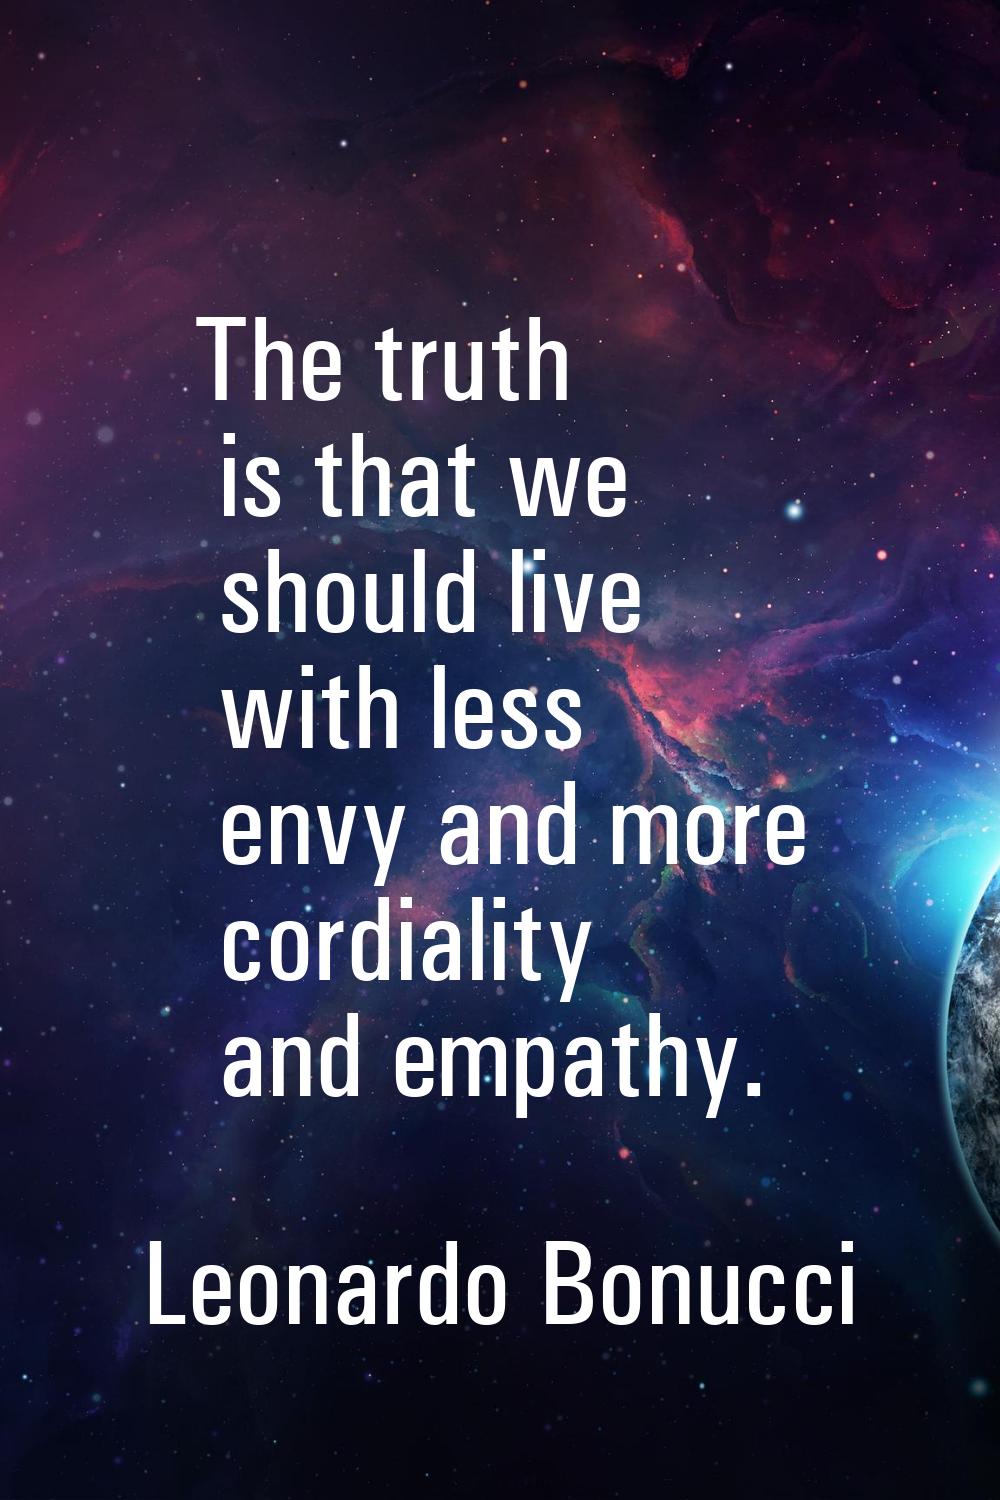 The truth is that we should live with less envy and more cordiality and empathy.